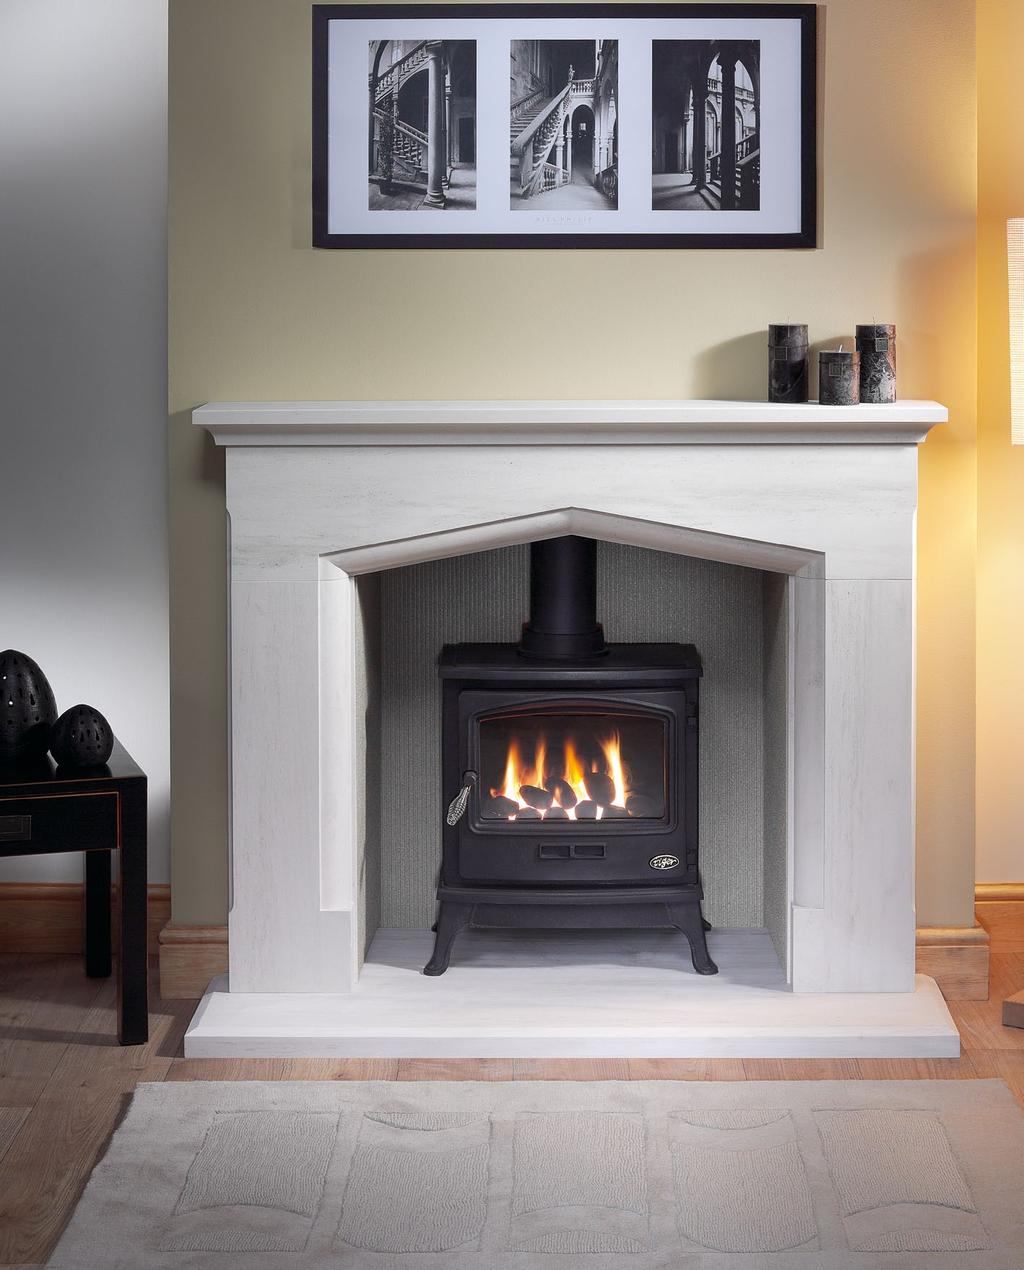 Portuguese Limestone STOVE: TIGER GAS, CHAMBER: natural reeded fireboard